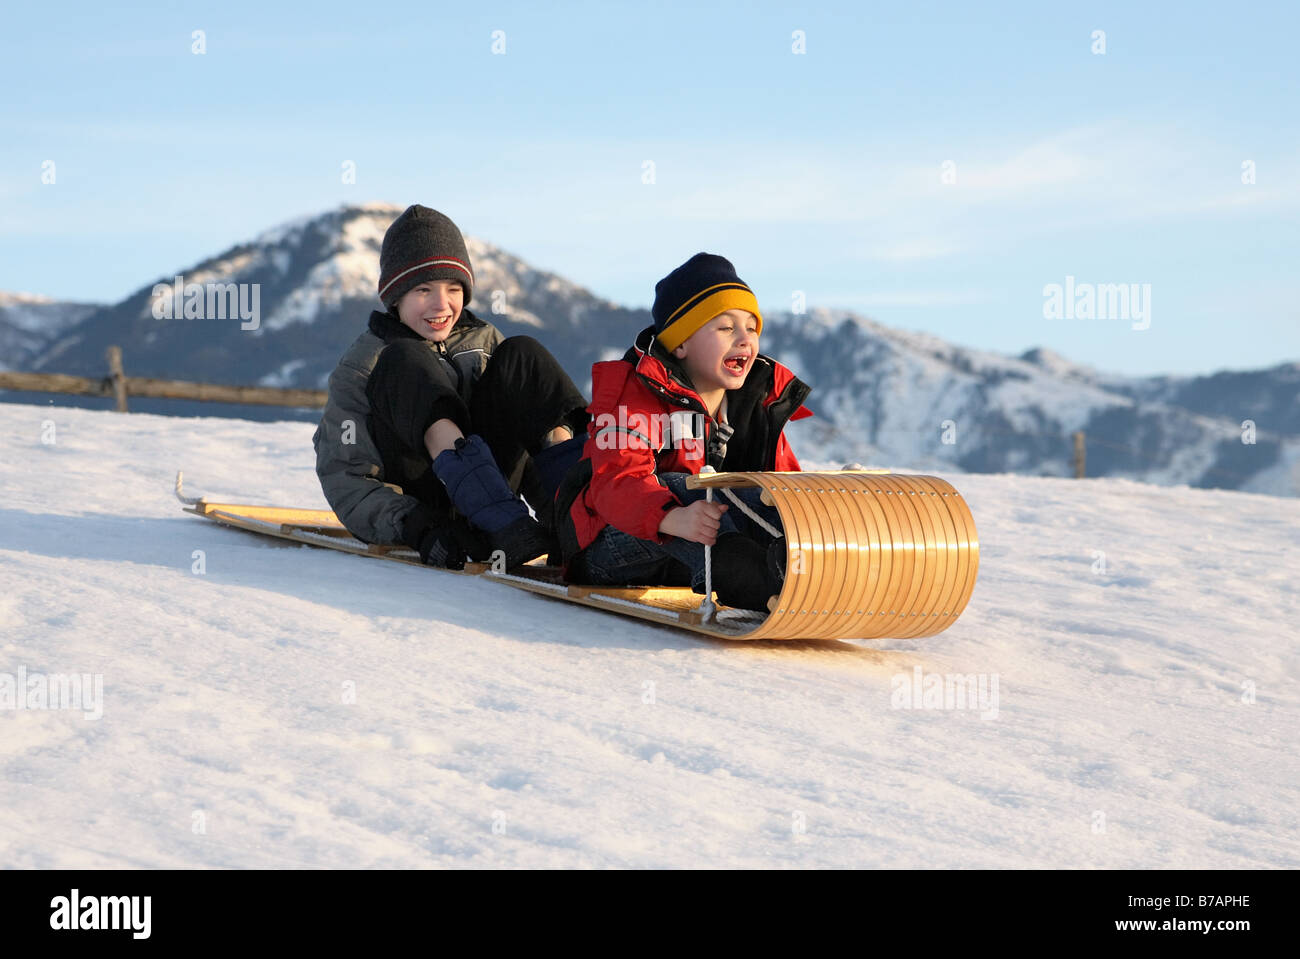 two boys sledding down a hill on a toboggan with excited expressions Stock Photo